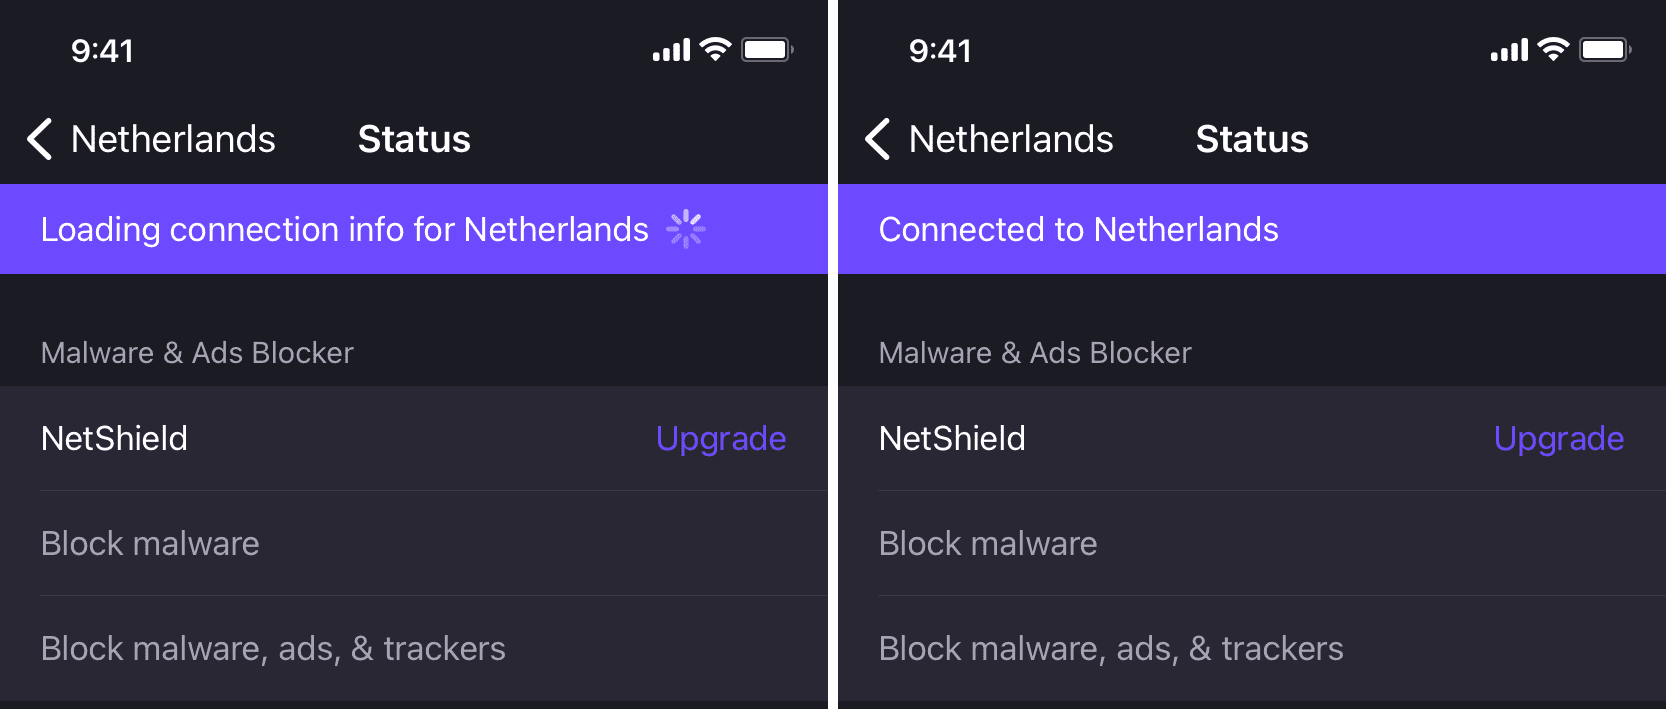 Loading connection info for VPN on iPhone